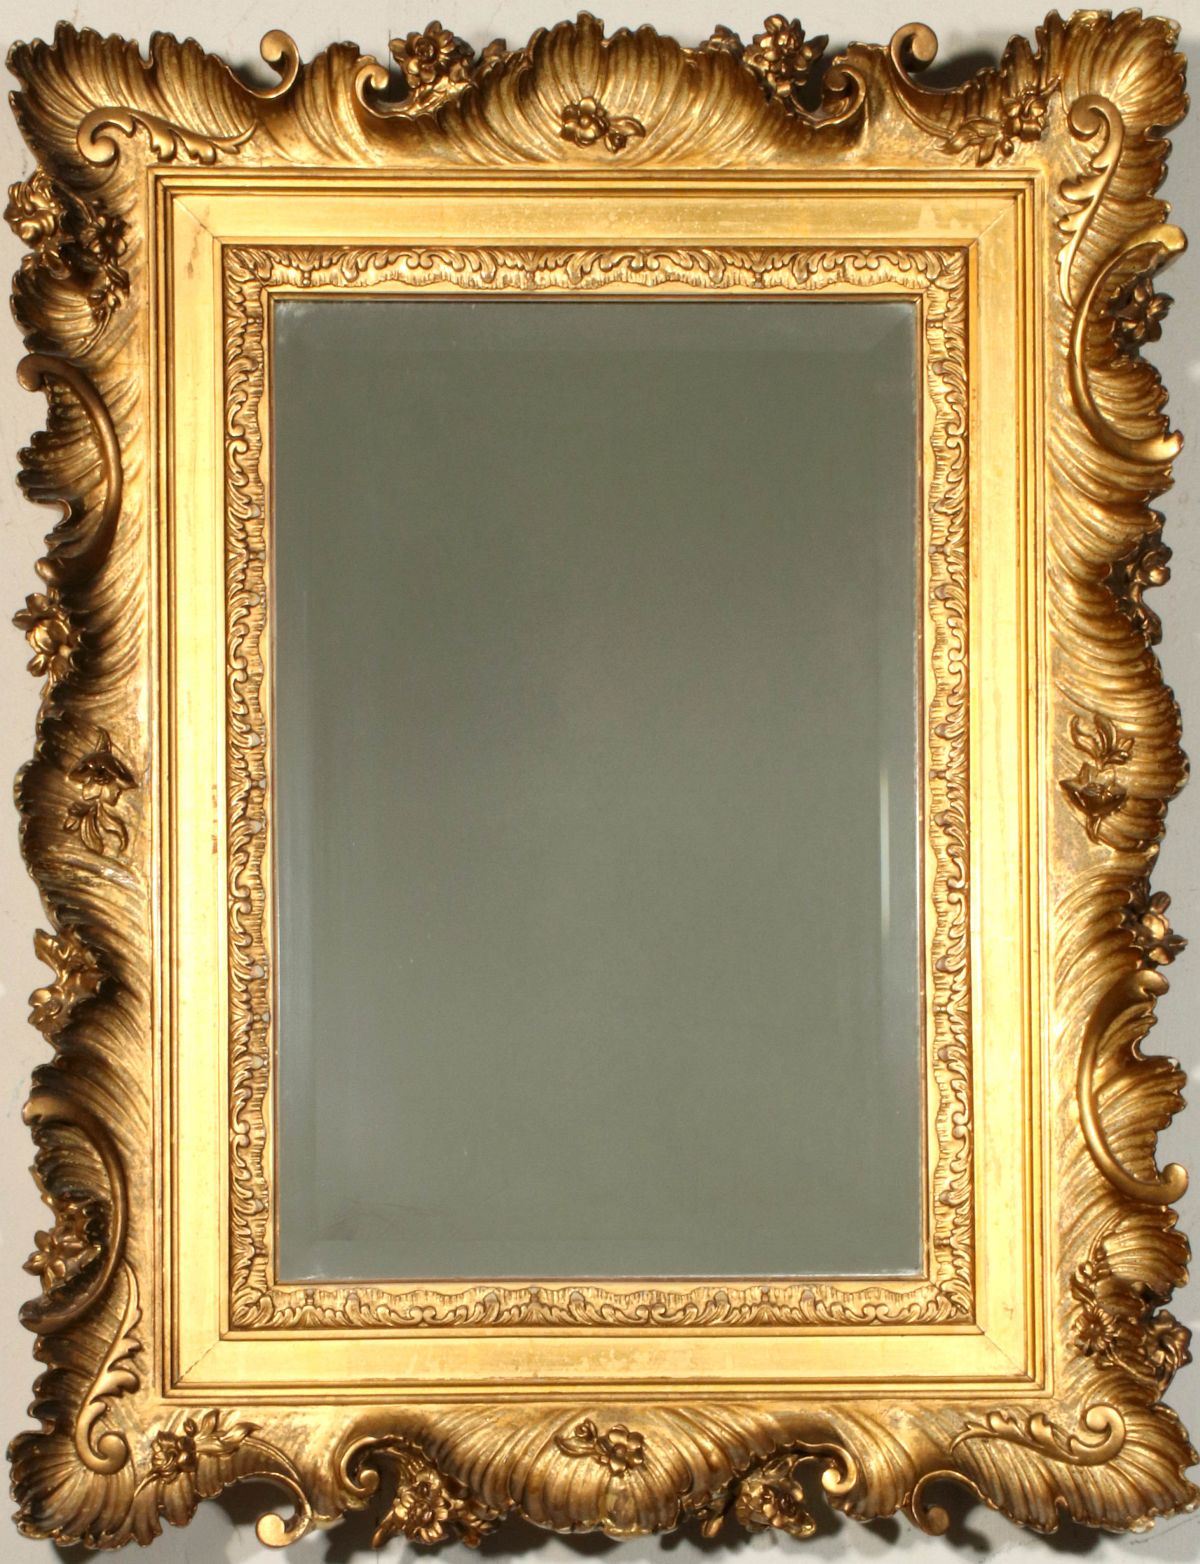 A 19TH CENTURY MIRROR WITH HEAVY ROCOCO FRAME